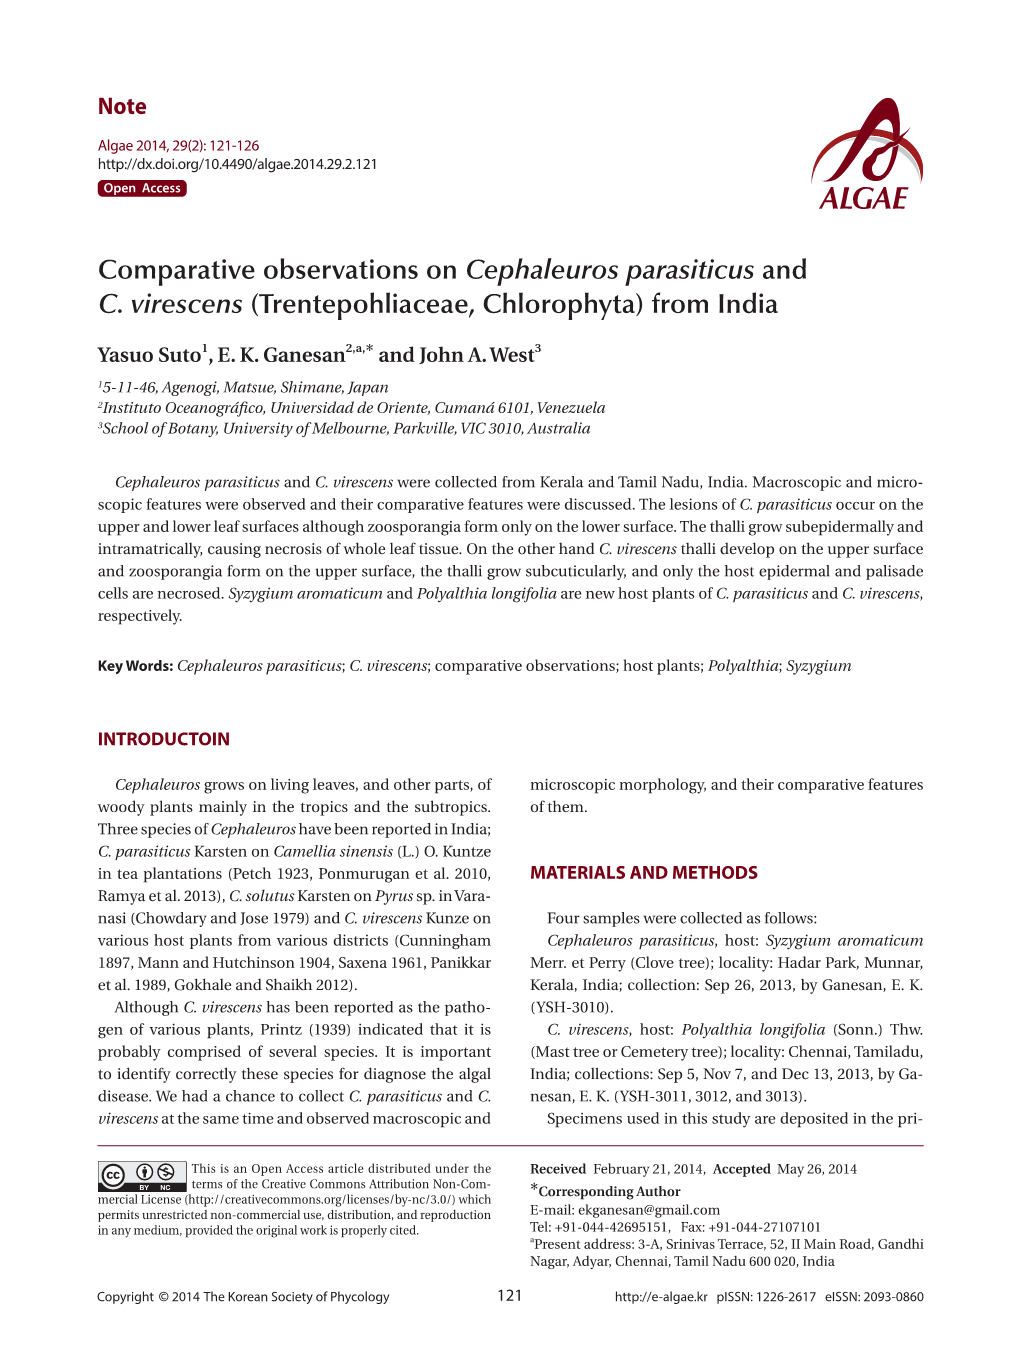 Comparative Observations on Cephaleuros Parasiticus and C